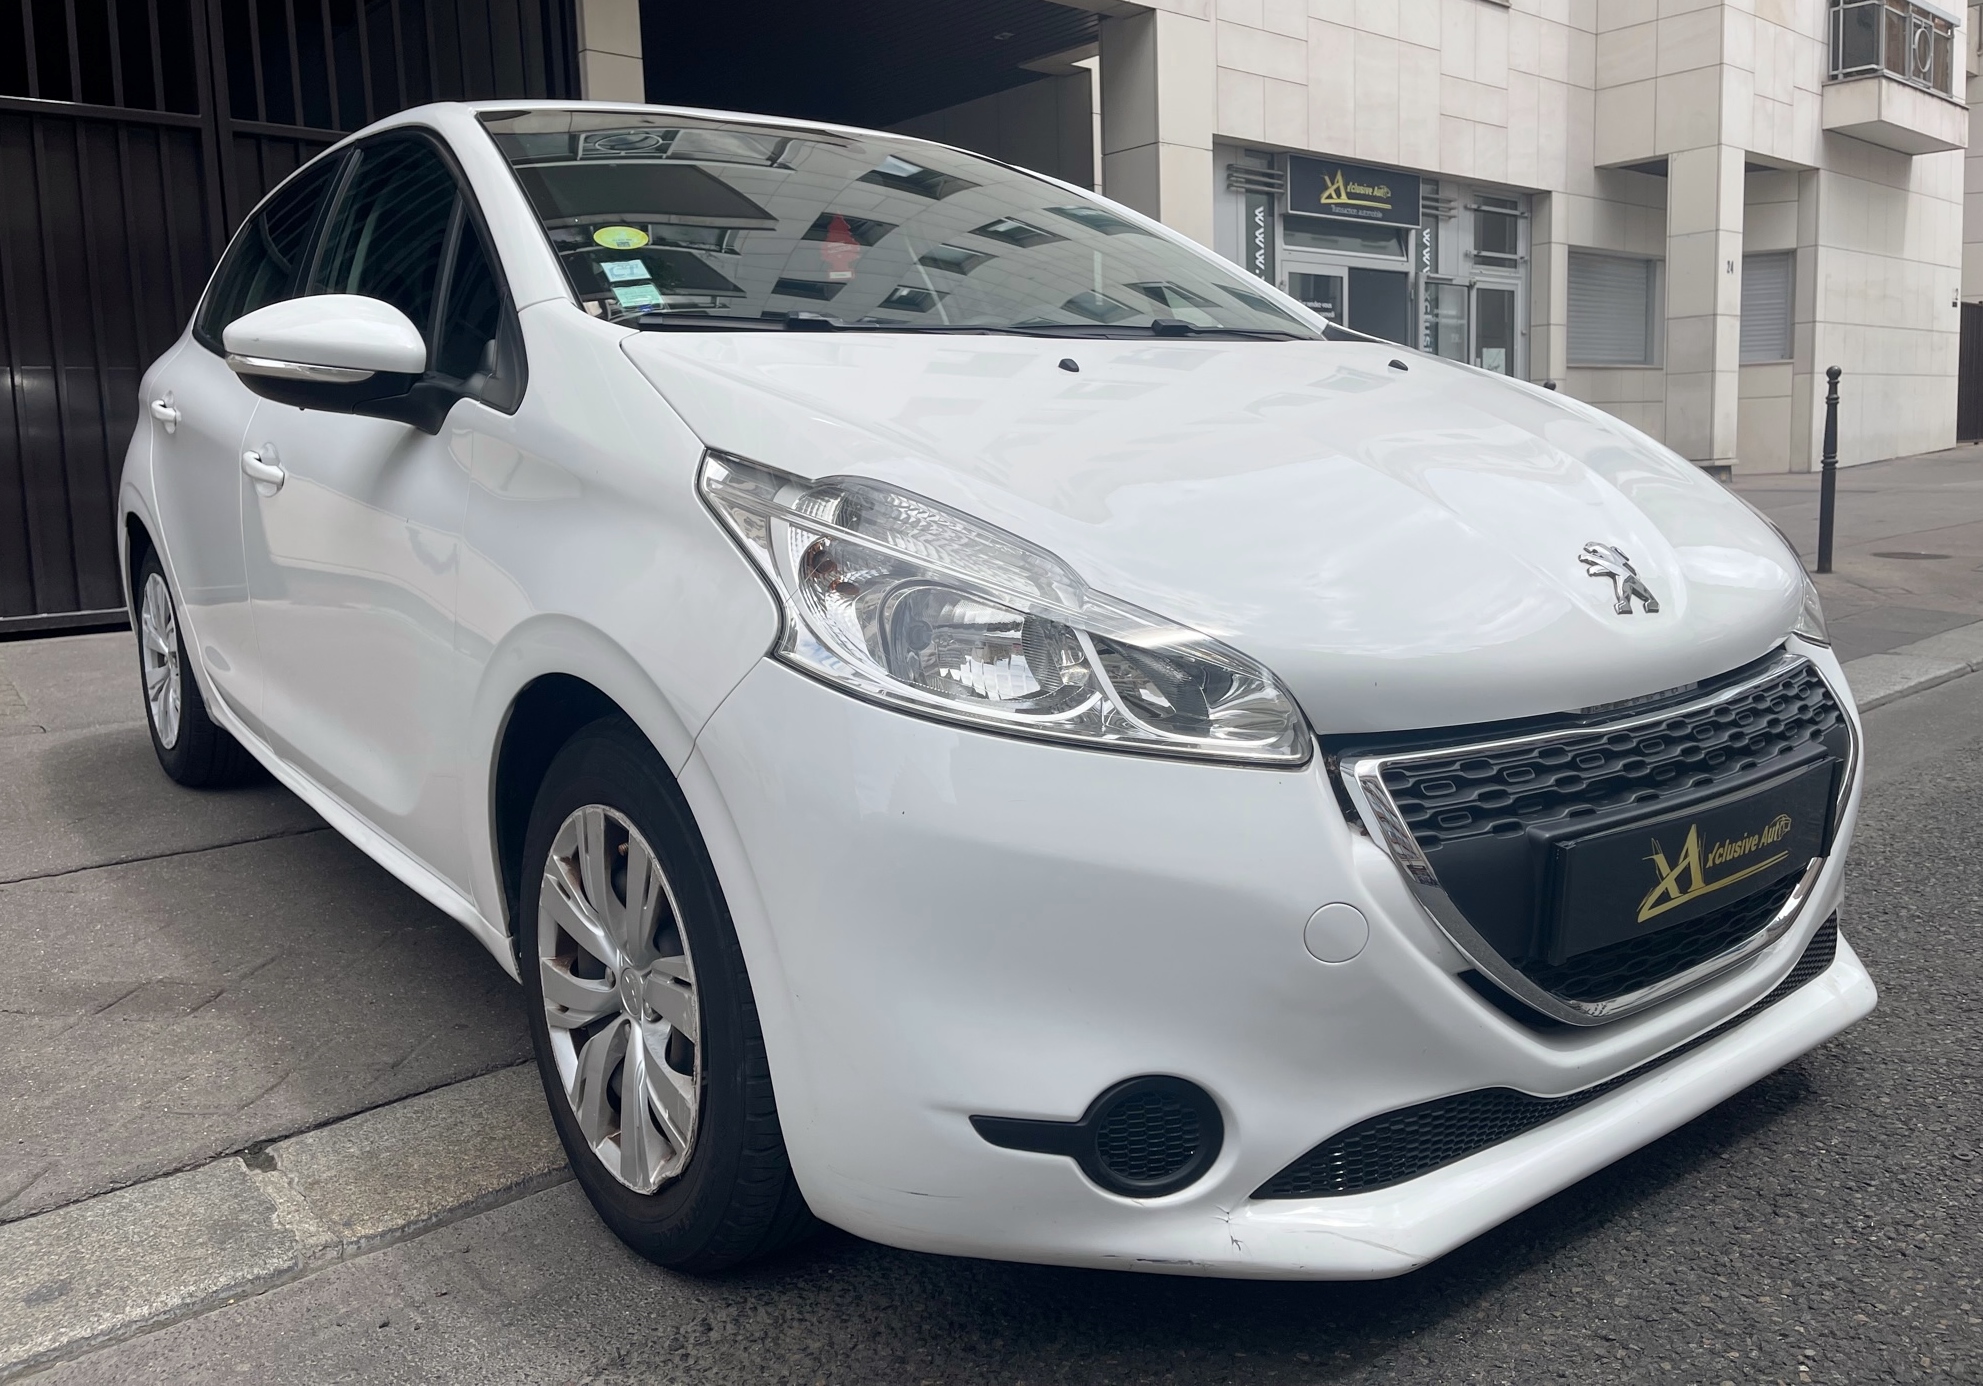 PEUGEOT 208 1.4 HDI 68 ACTIVE